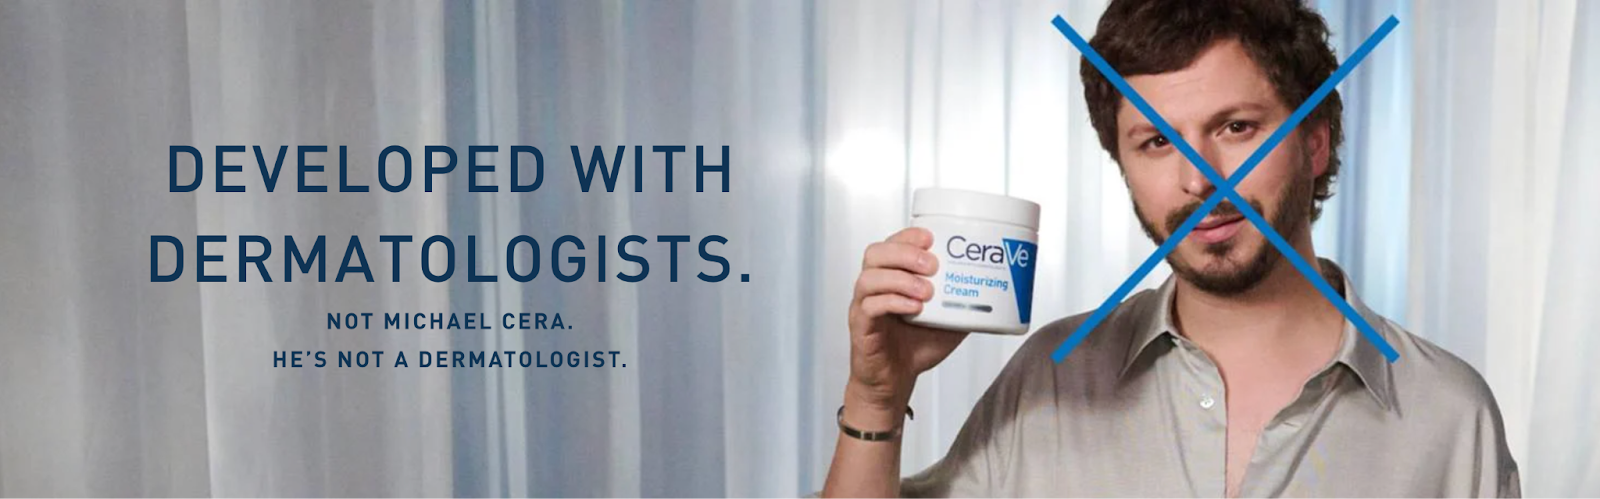 Photo of Michael Cera holding a pot of CeraVe lotion. There is a blue cross over his face. Image text reads: “Developed with dermatologists. Not Michael Cera. He’s not a dermatologist.” 